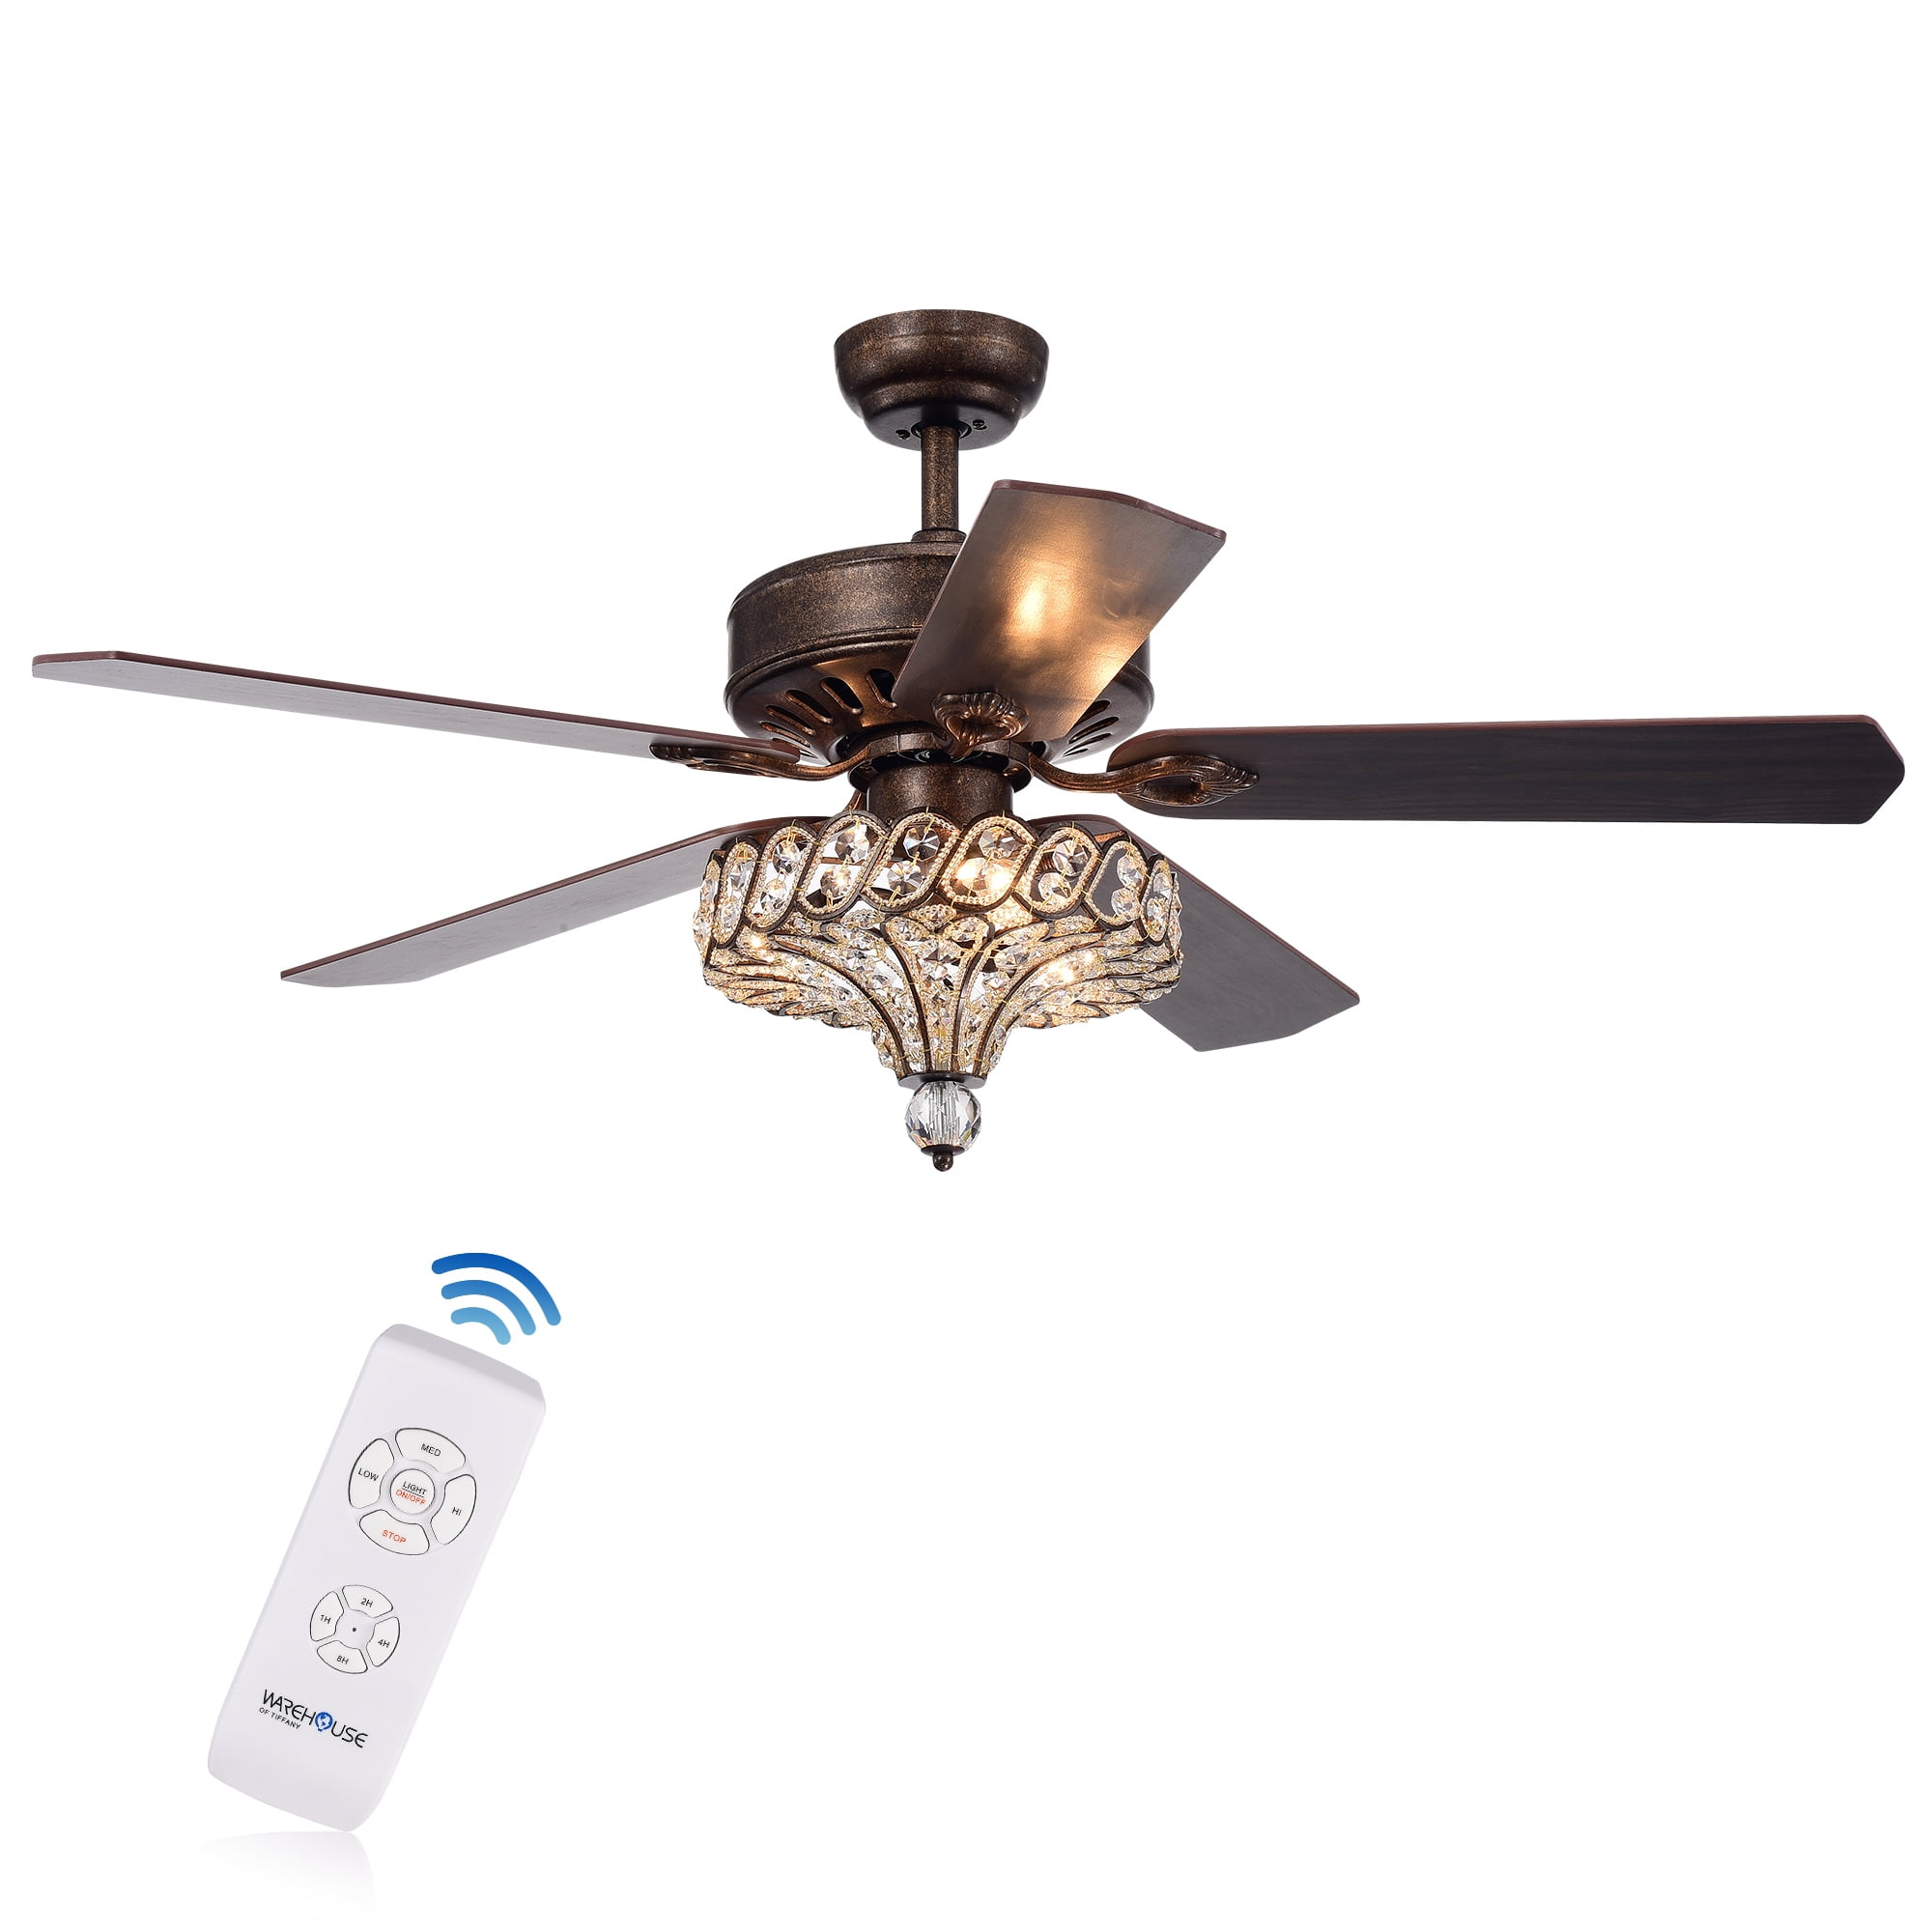 Pilette 5-Blade Antique Speckled Bronze Lighted Ceiling Fan w Crystal Shade Optional Remote Control (incl 2 Color Choice Blades)